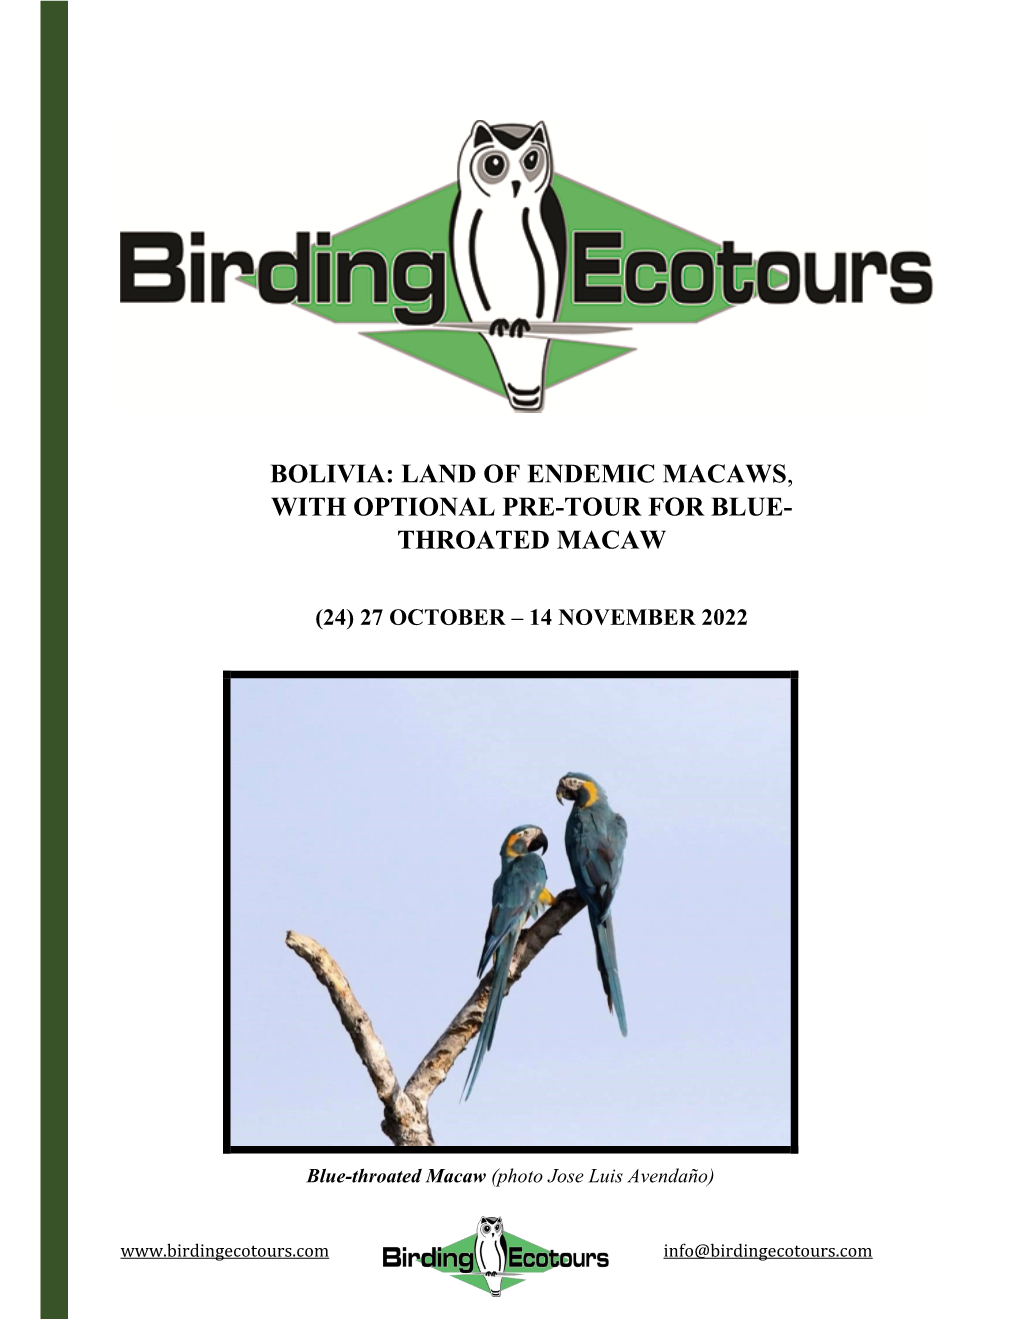 Bolivia: Land of Endemic Macaws, with Optional Pre-Tour for Blue- Throated Macaw